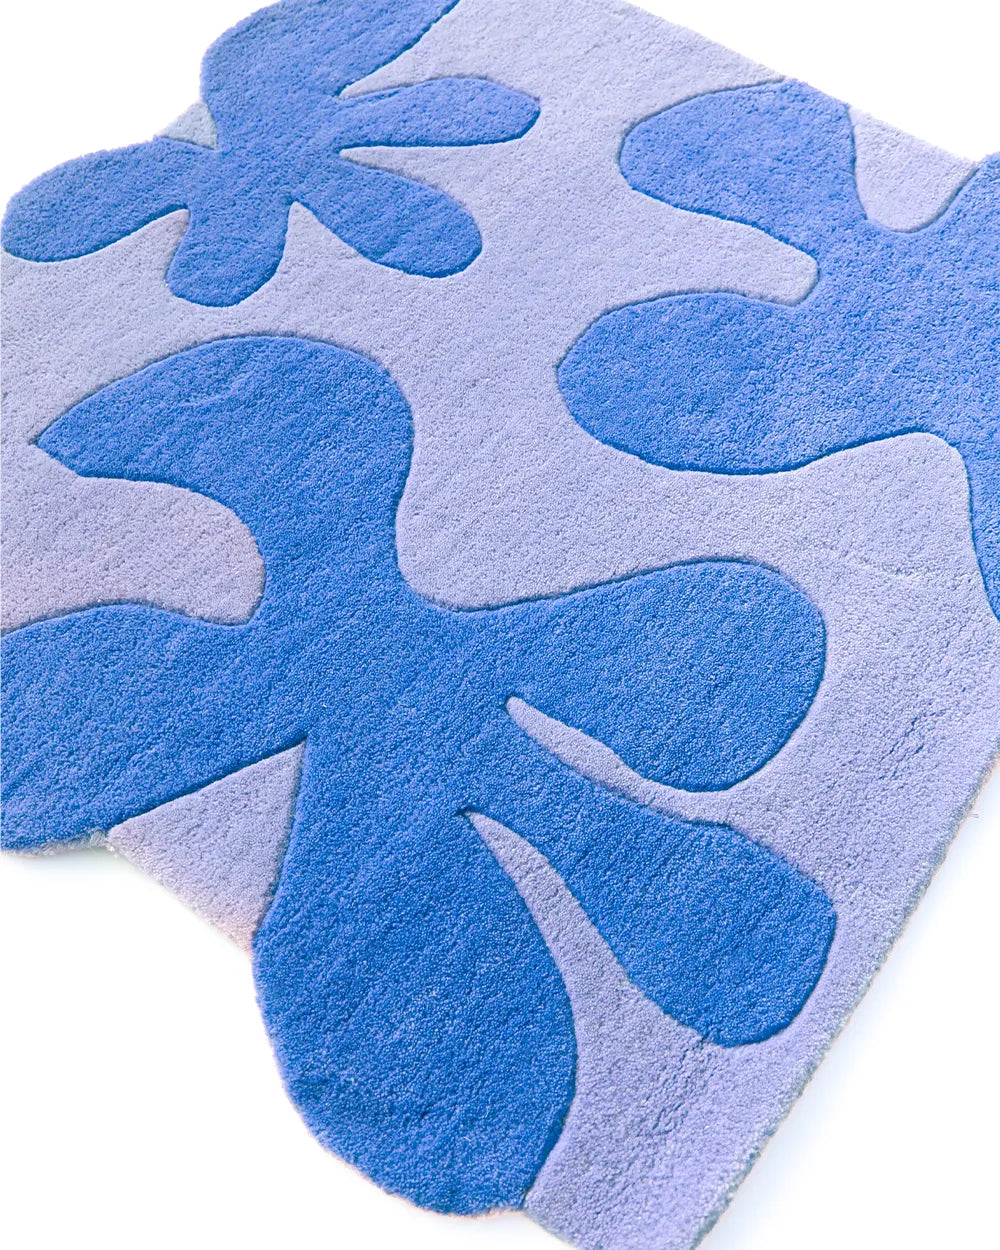 Blue Blossom Square Tufted Rug with abstract flower design in shades of darker blue on a light blue square base.